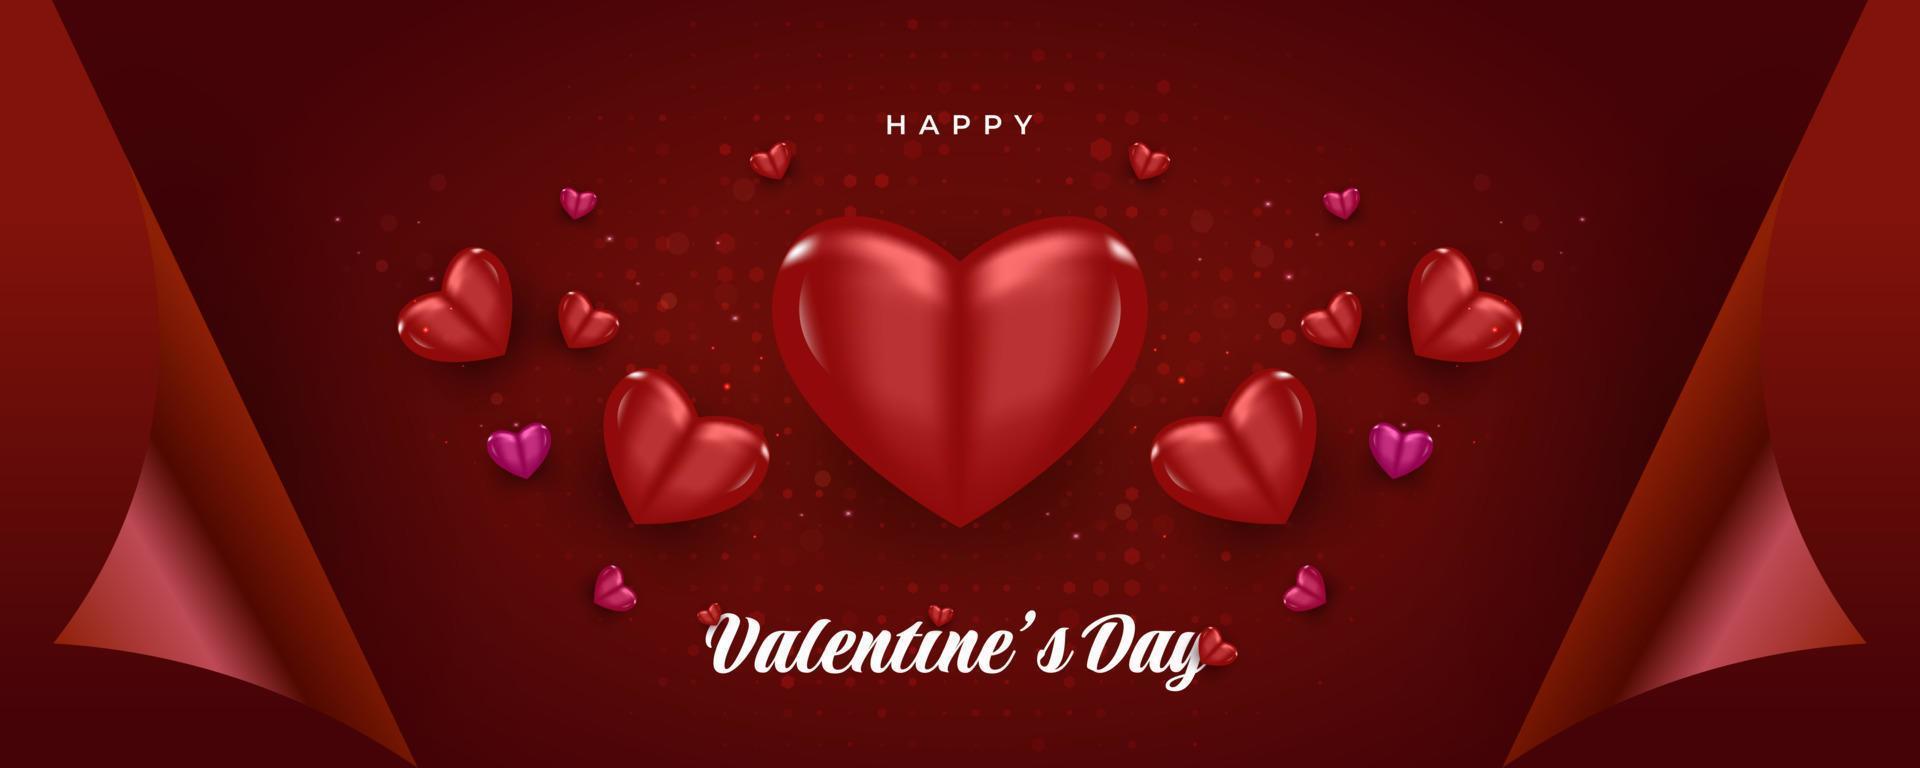 Valentine's Day Background with 3D Red and Pink Hearts and Wrapping Paper. Happy Valentine's Day Typography for Banner, Poster, Card, or Website vector